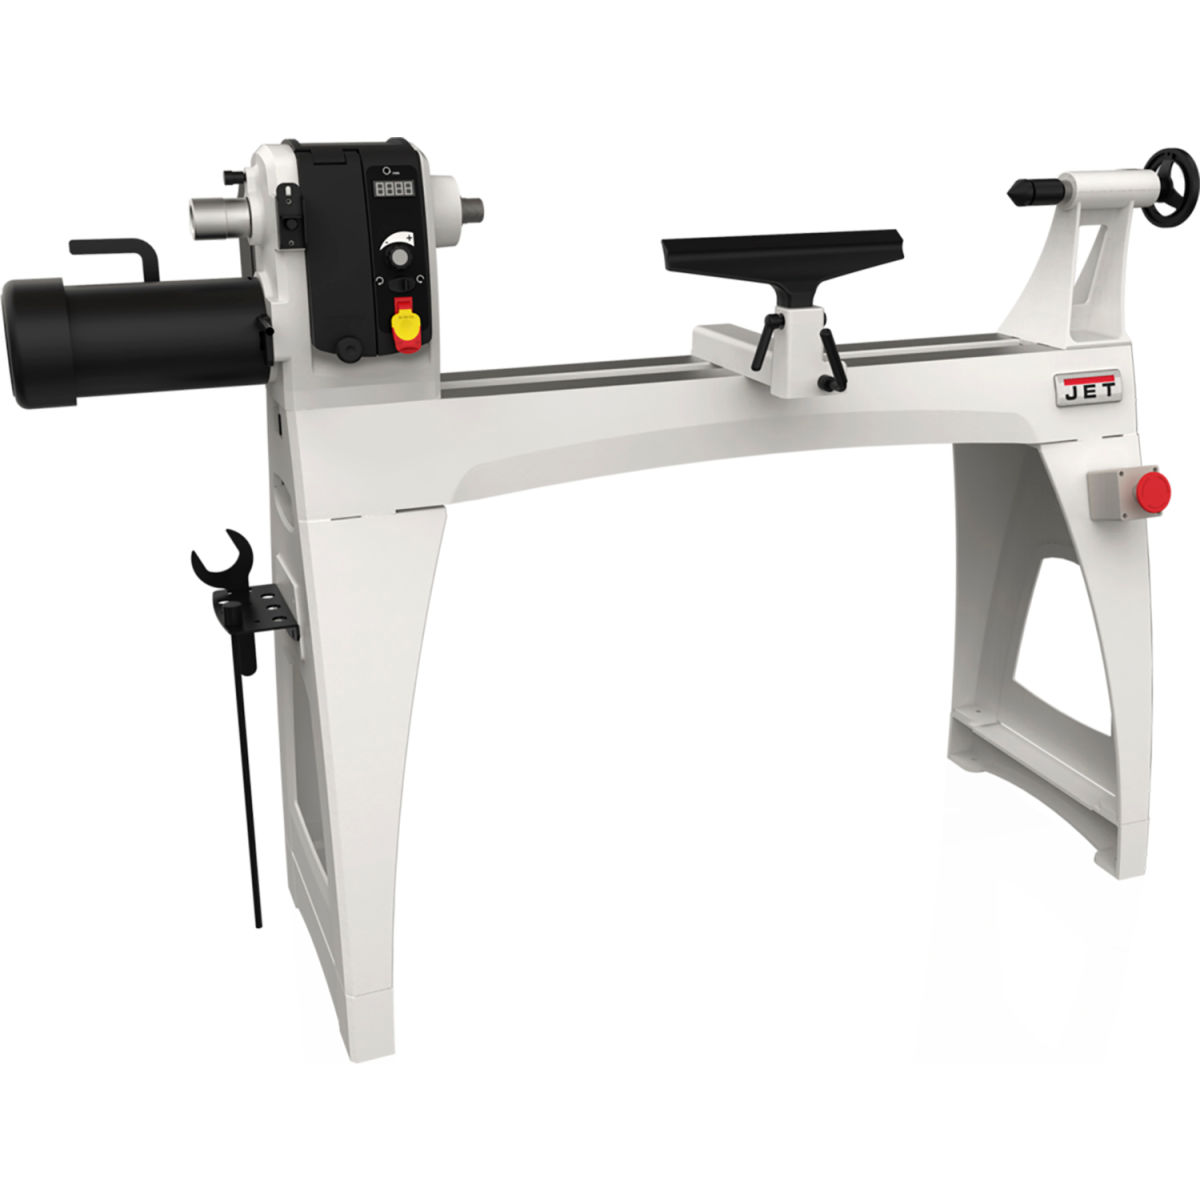 PinPoint 18 x 40 in. 719600 JWL-1840EVS 3HP 230V Wood Lathe with Stand